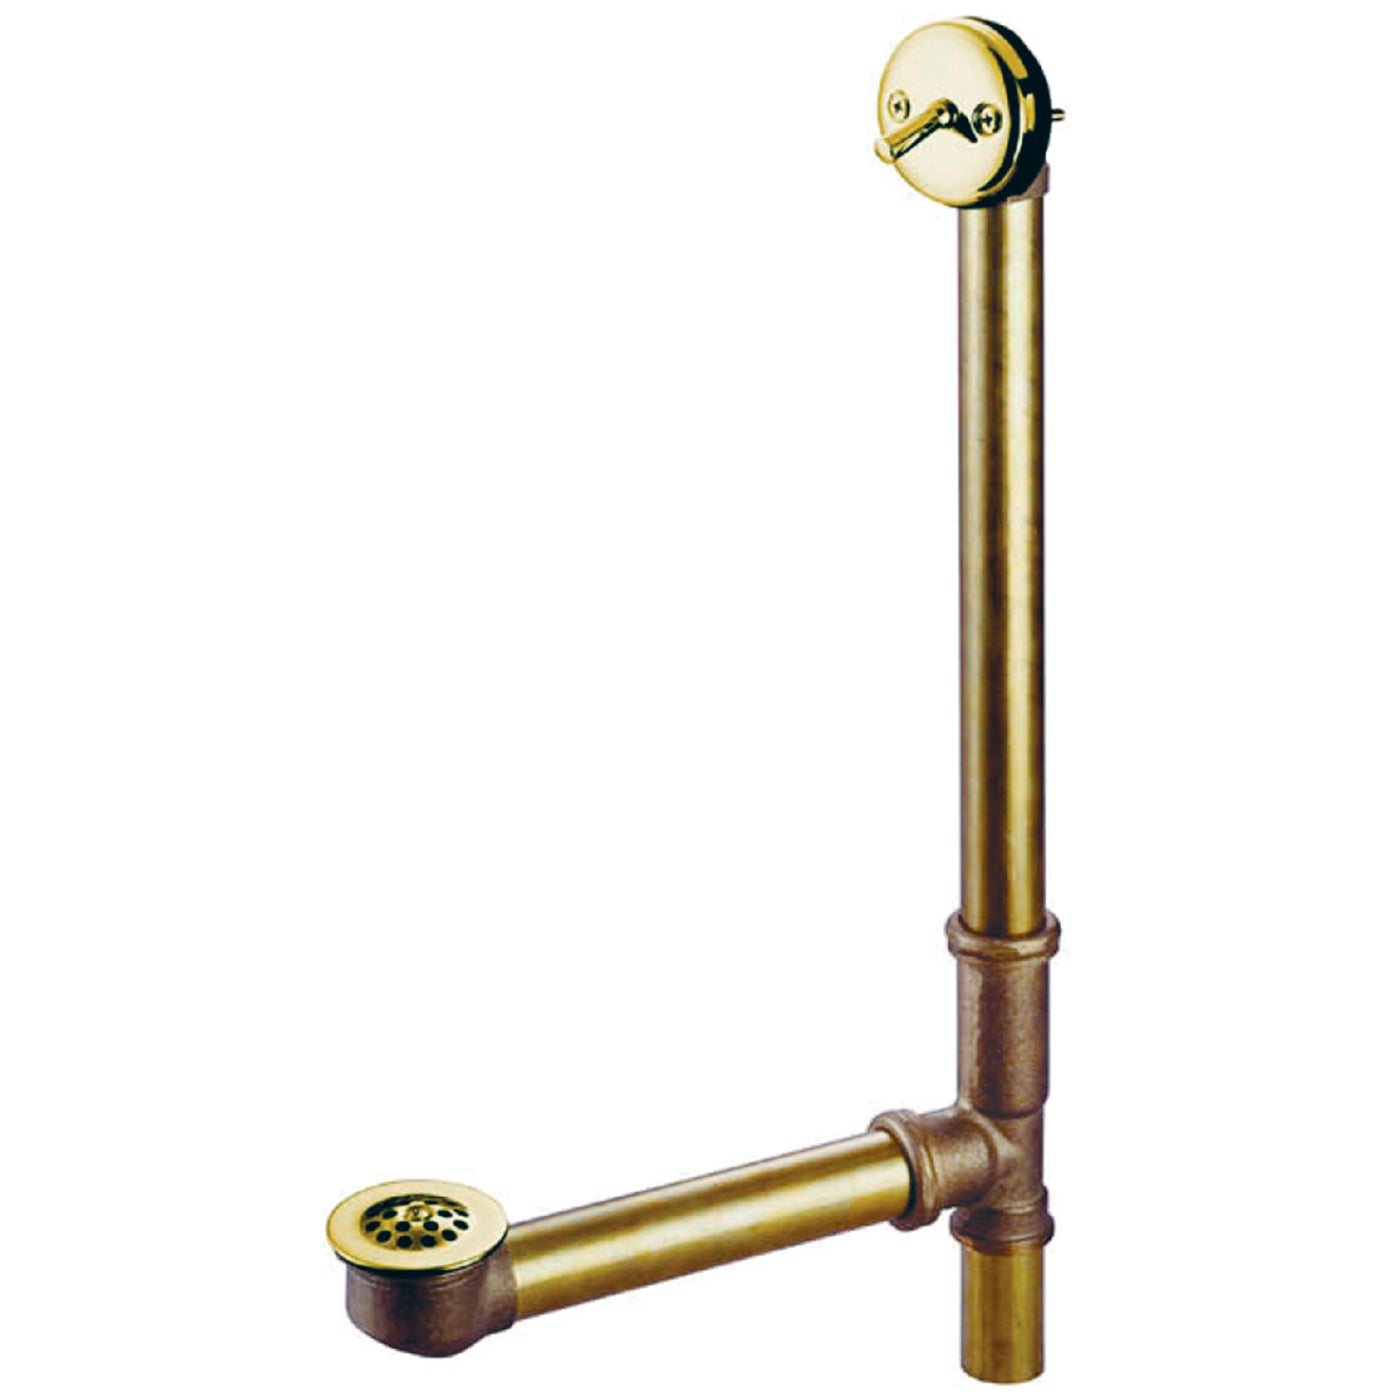 Elements of Design EDTL1162 21-Inch Trip Lever Waste and Overflow with Grid, Polished Brass